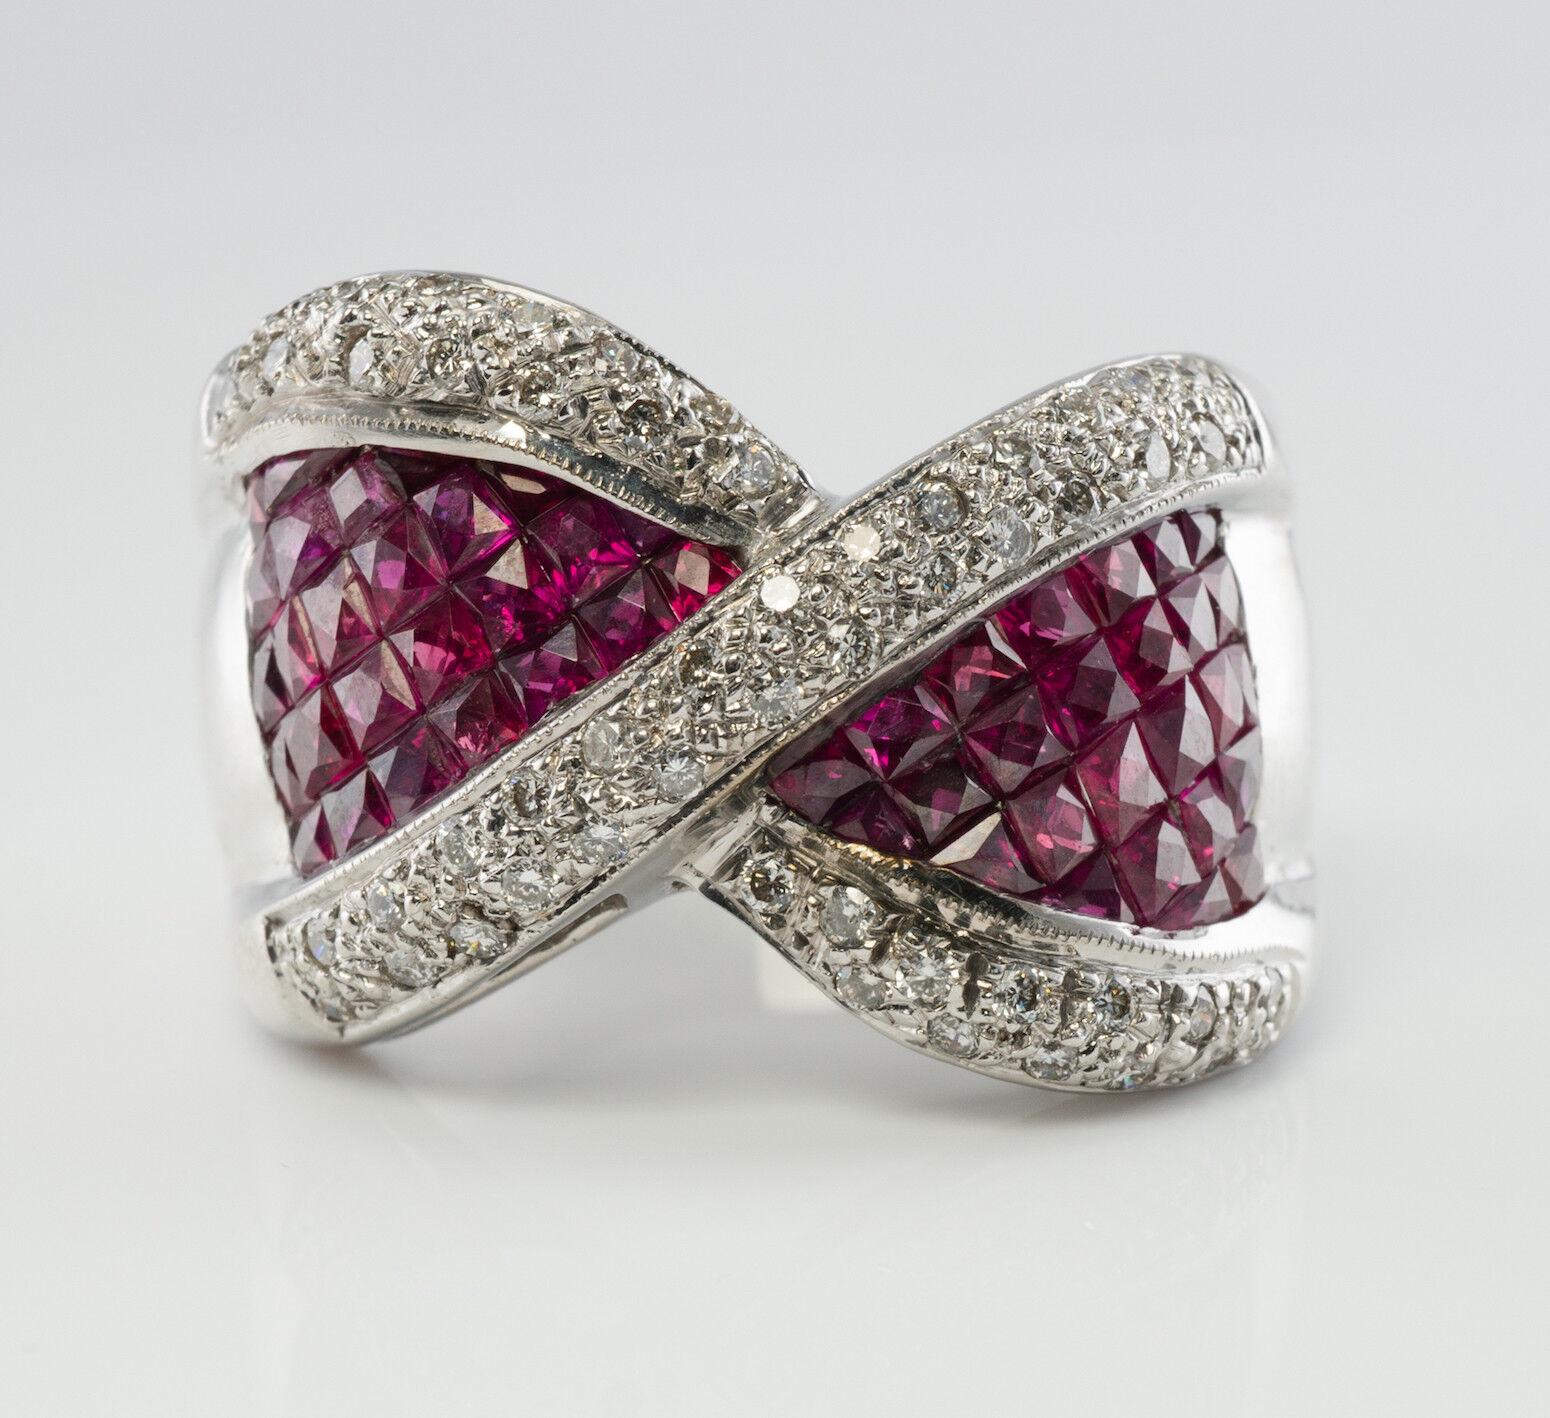 Diamond Ruby Ring 18K White Gold Wide Band Bow

This high-end estate ring is finely crafted in solid 18K White gold and set with the highest quality Earth-mined French-cut Rubies and Diamonds. There are 26 French cut Rubies on each side of the